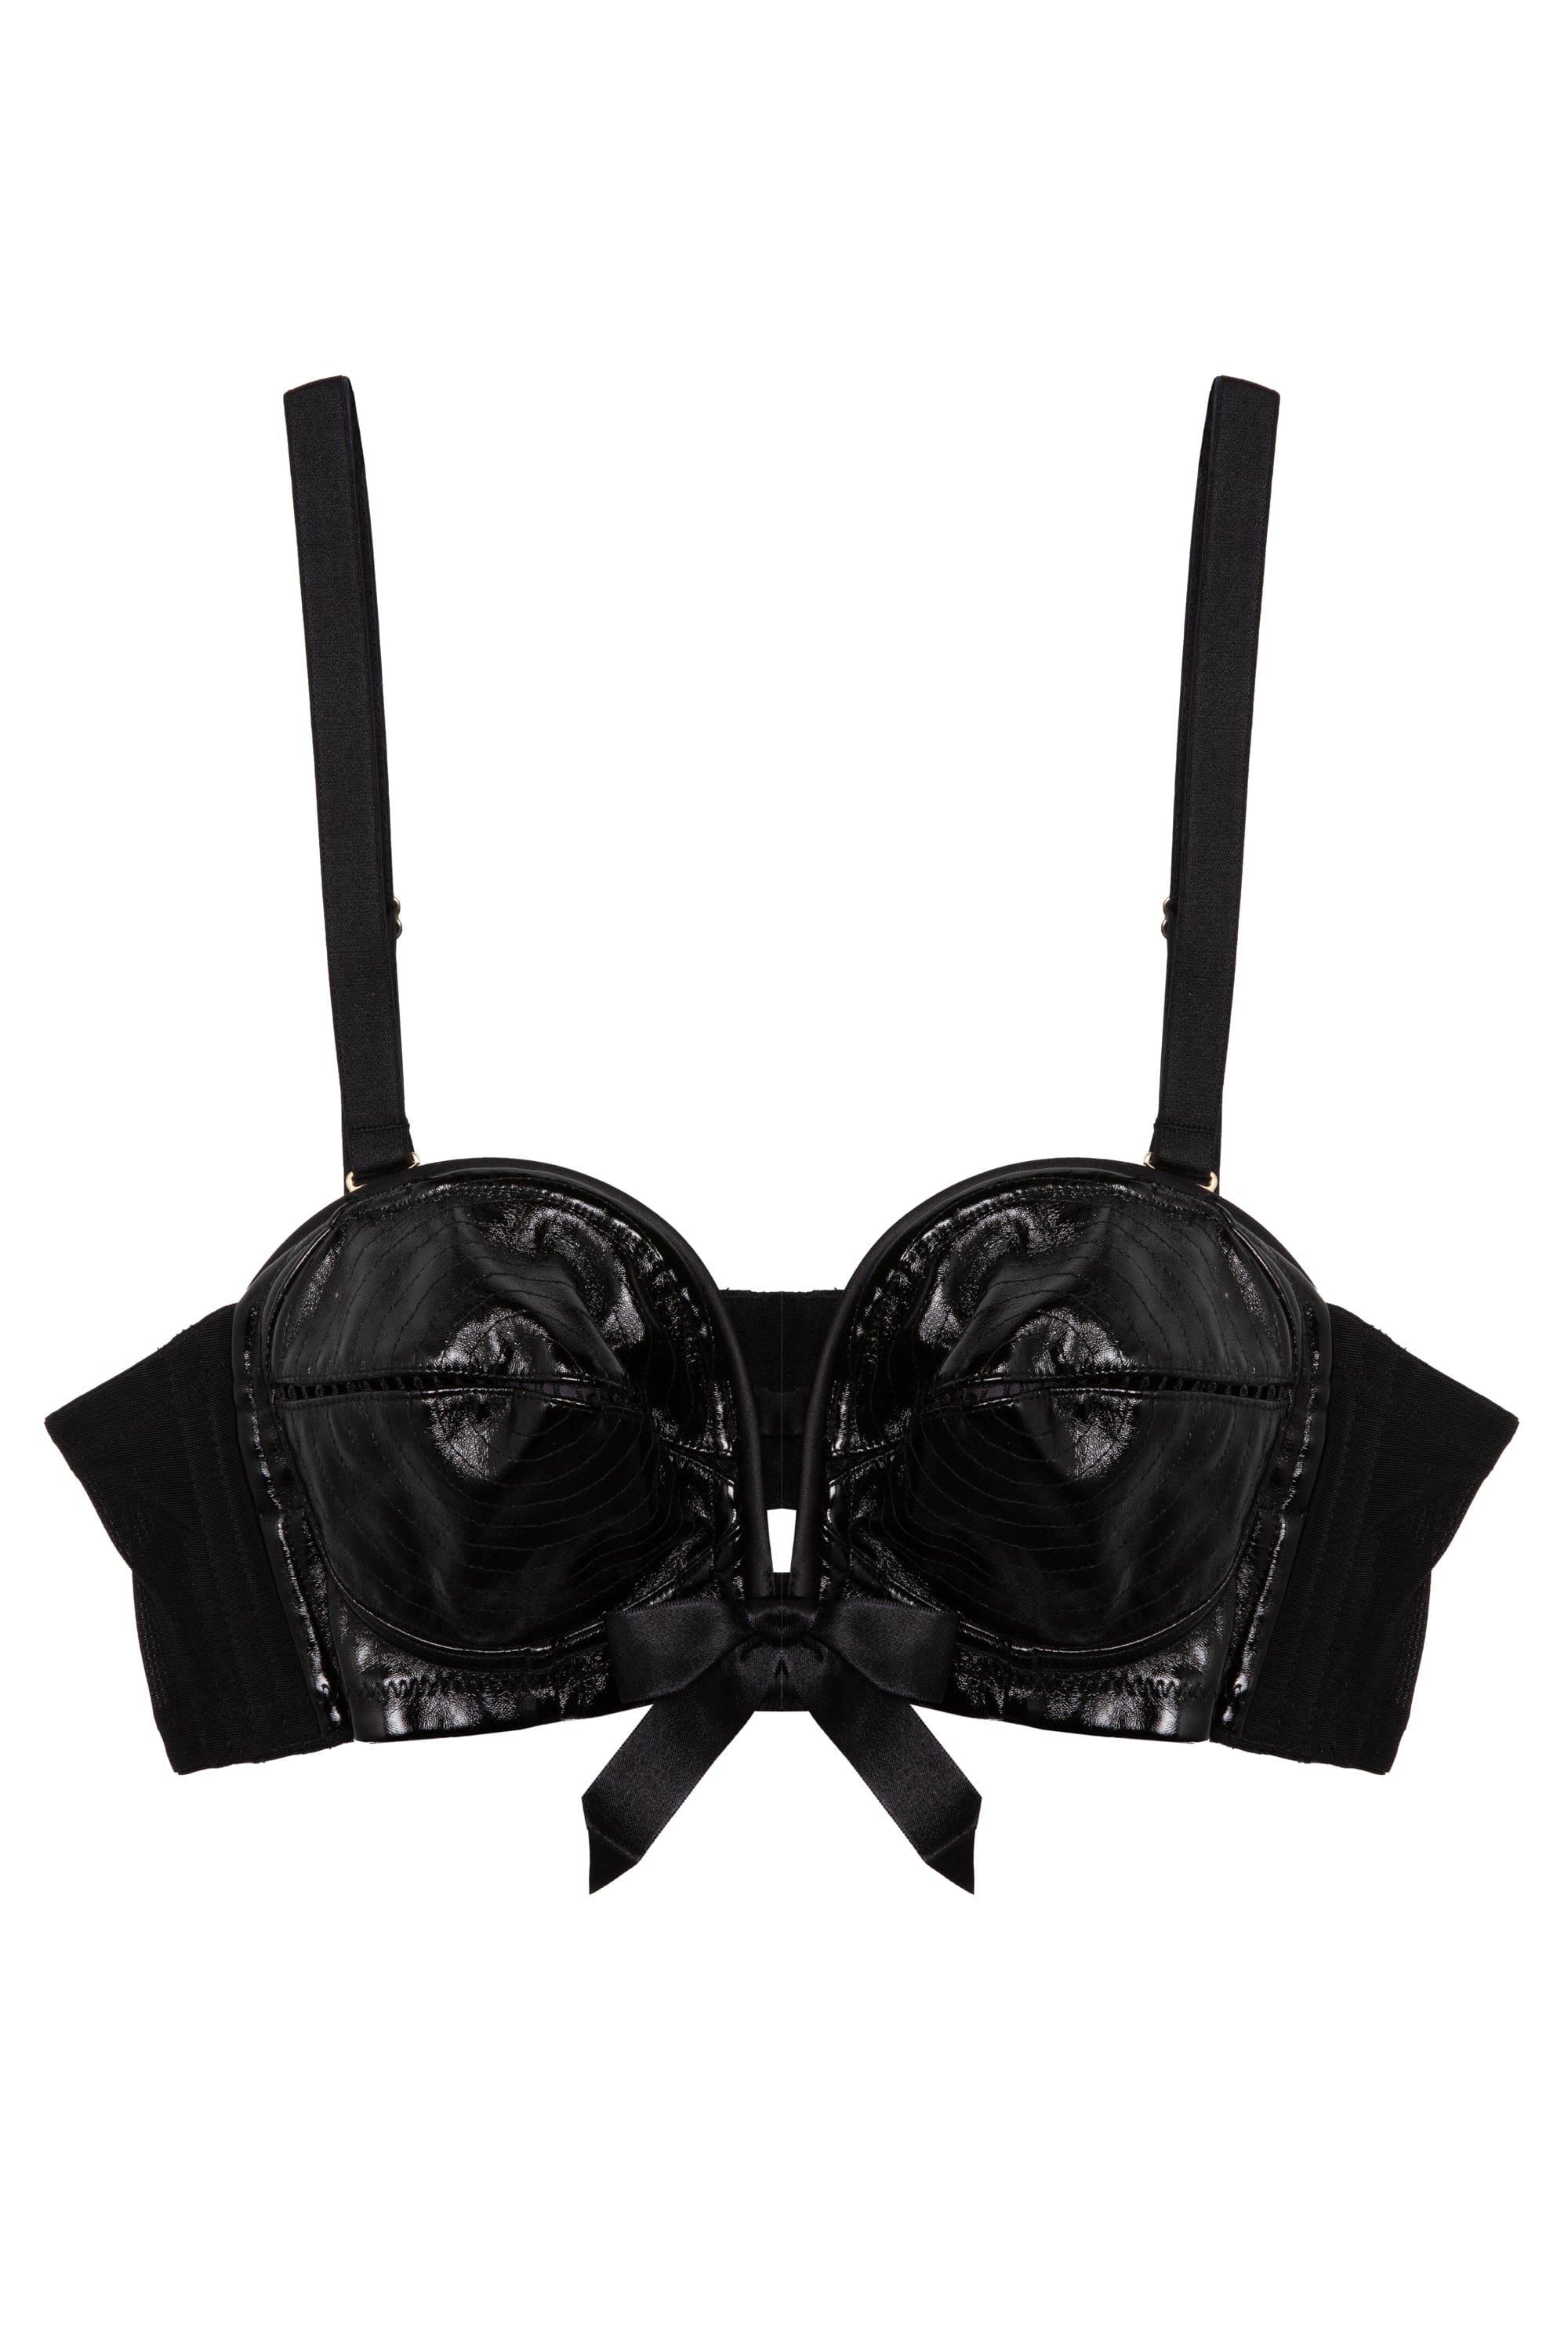 Product cut out of Genevieve black PVC overwire bra